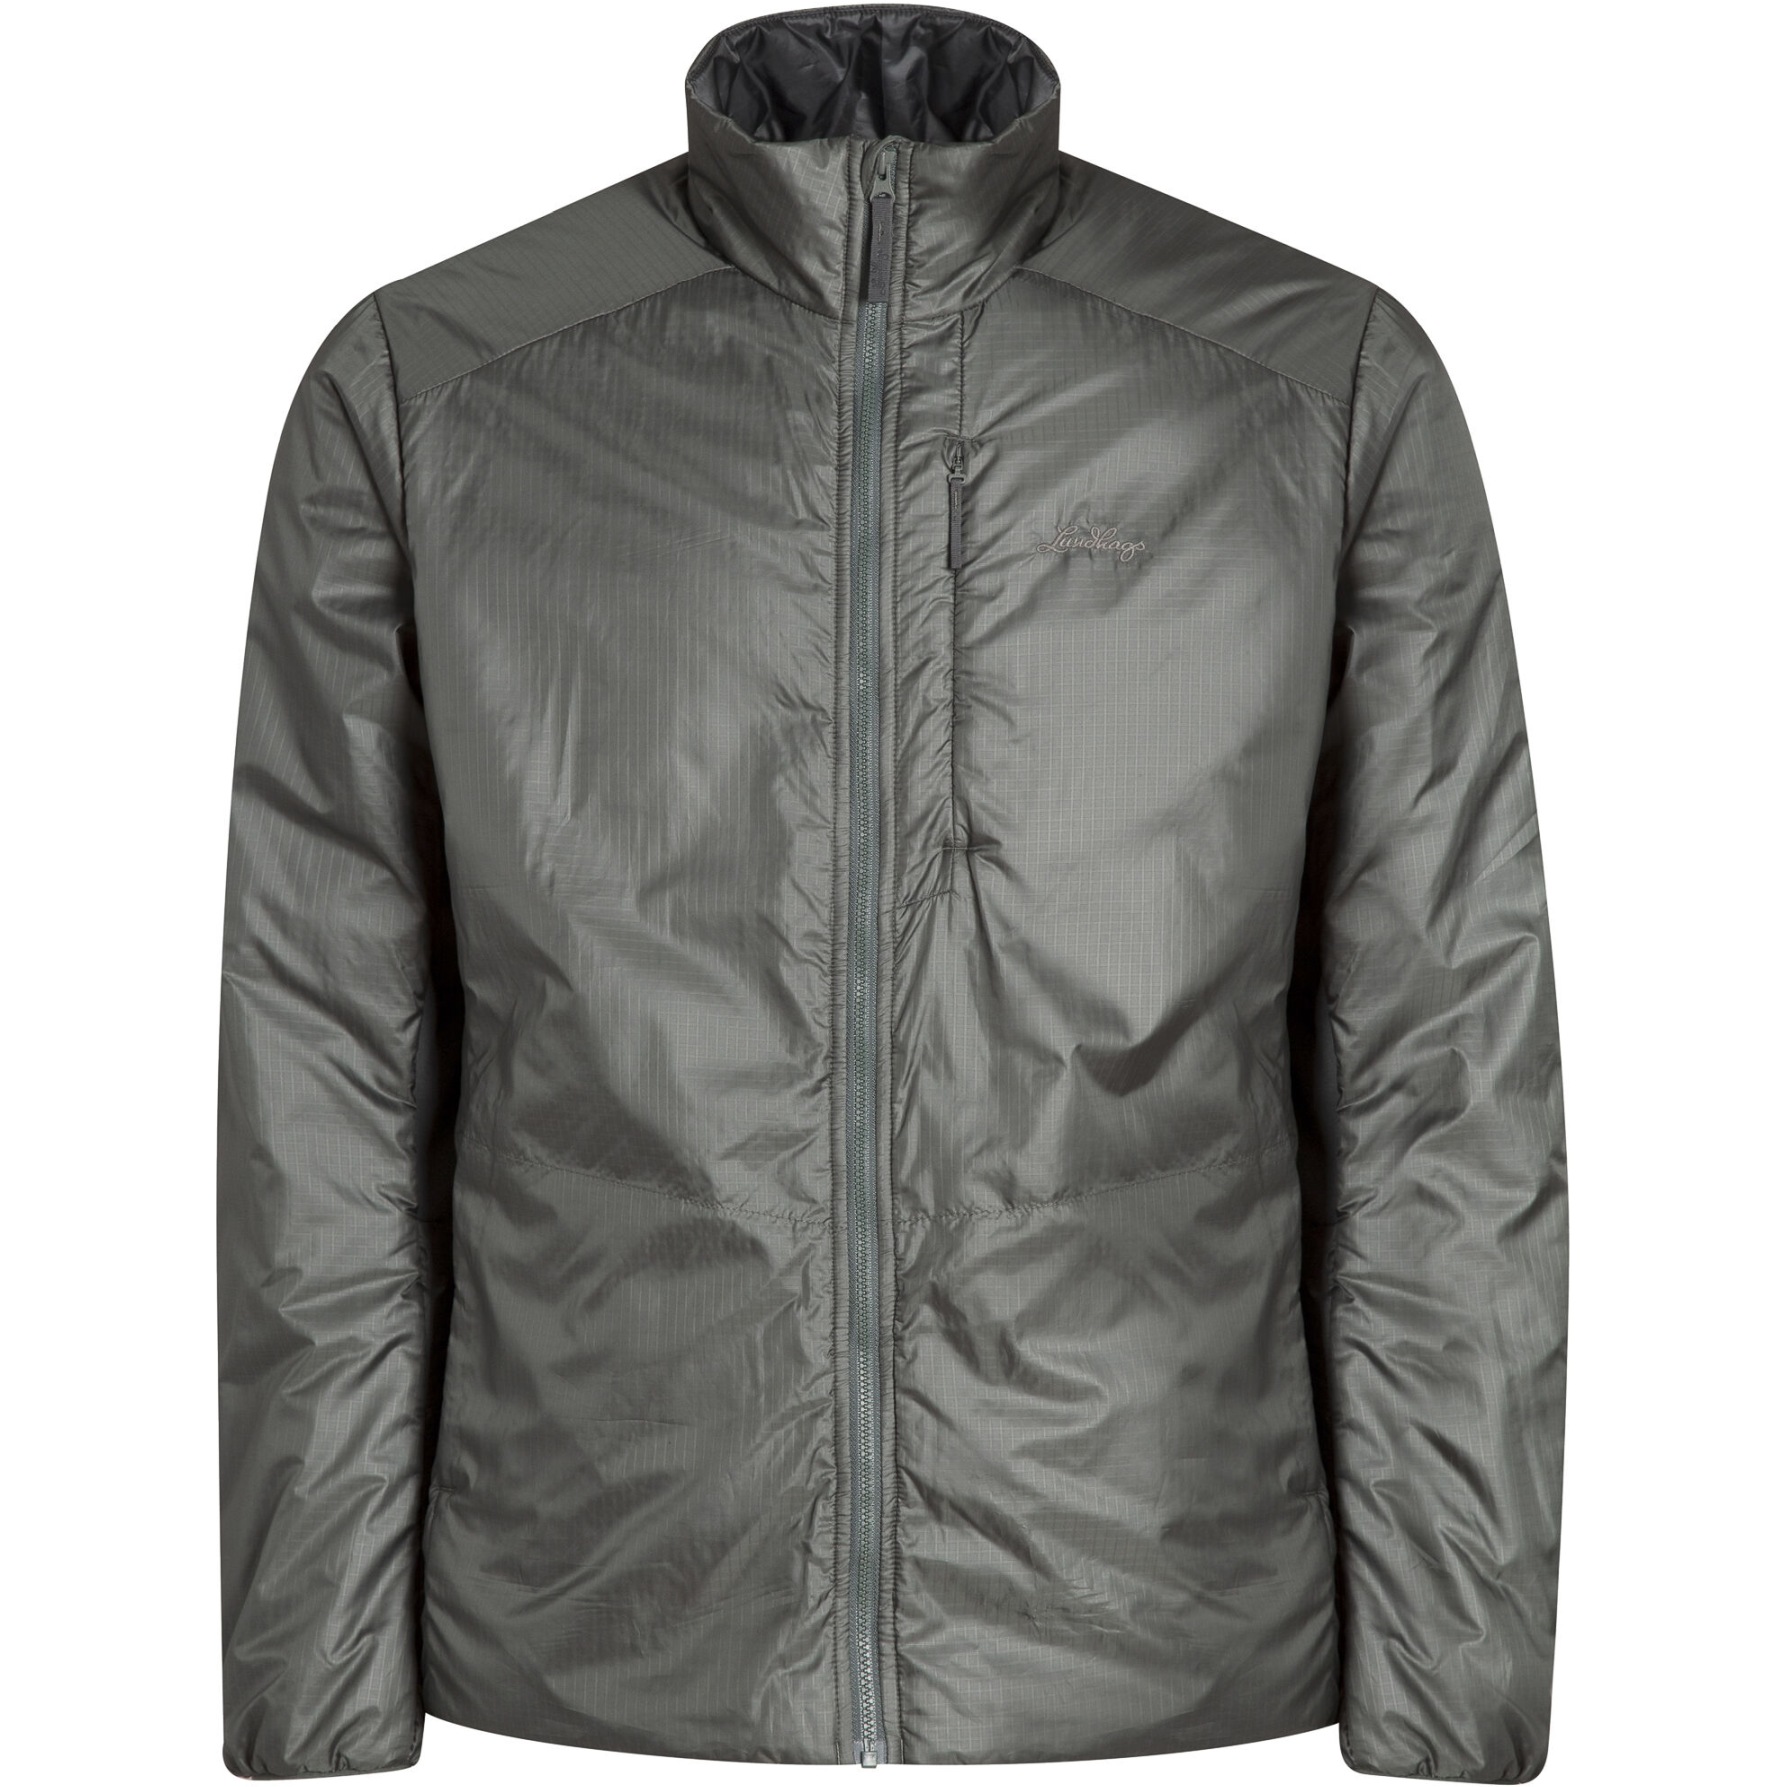 Picture of Lundhags Idu Light Jacket - Dark Agave 656